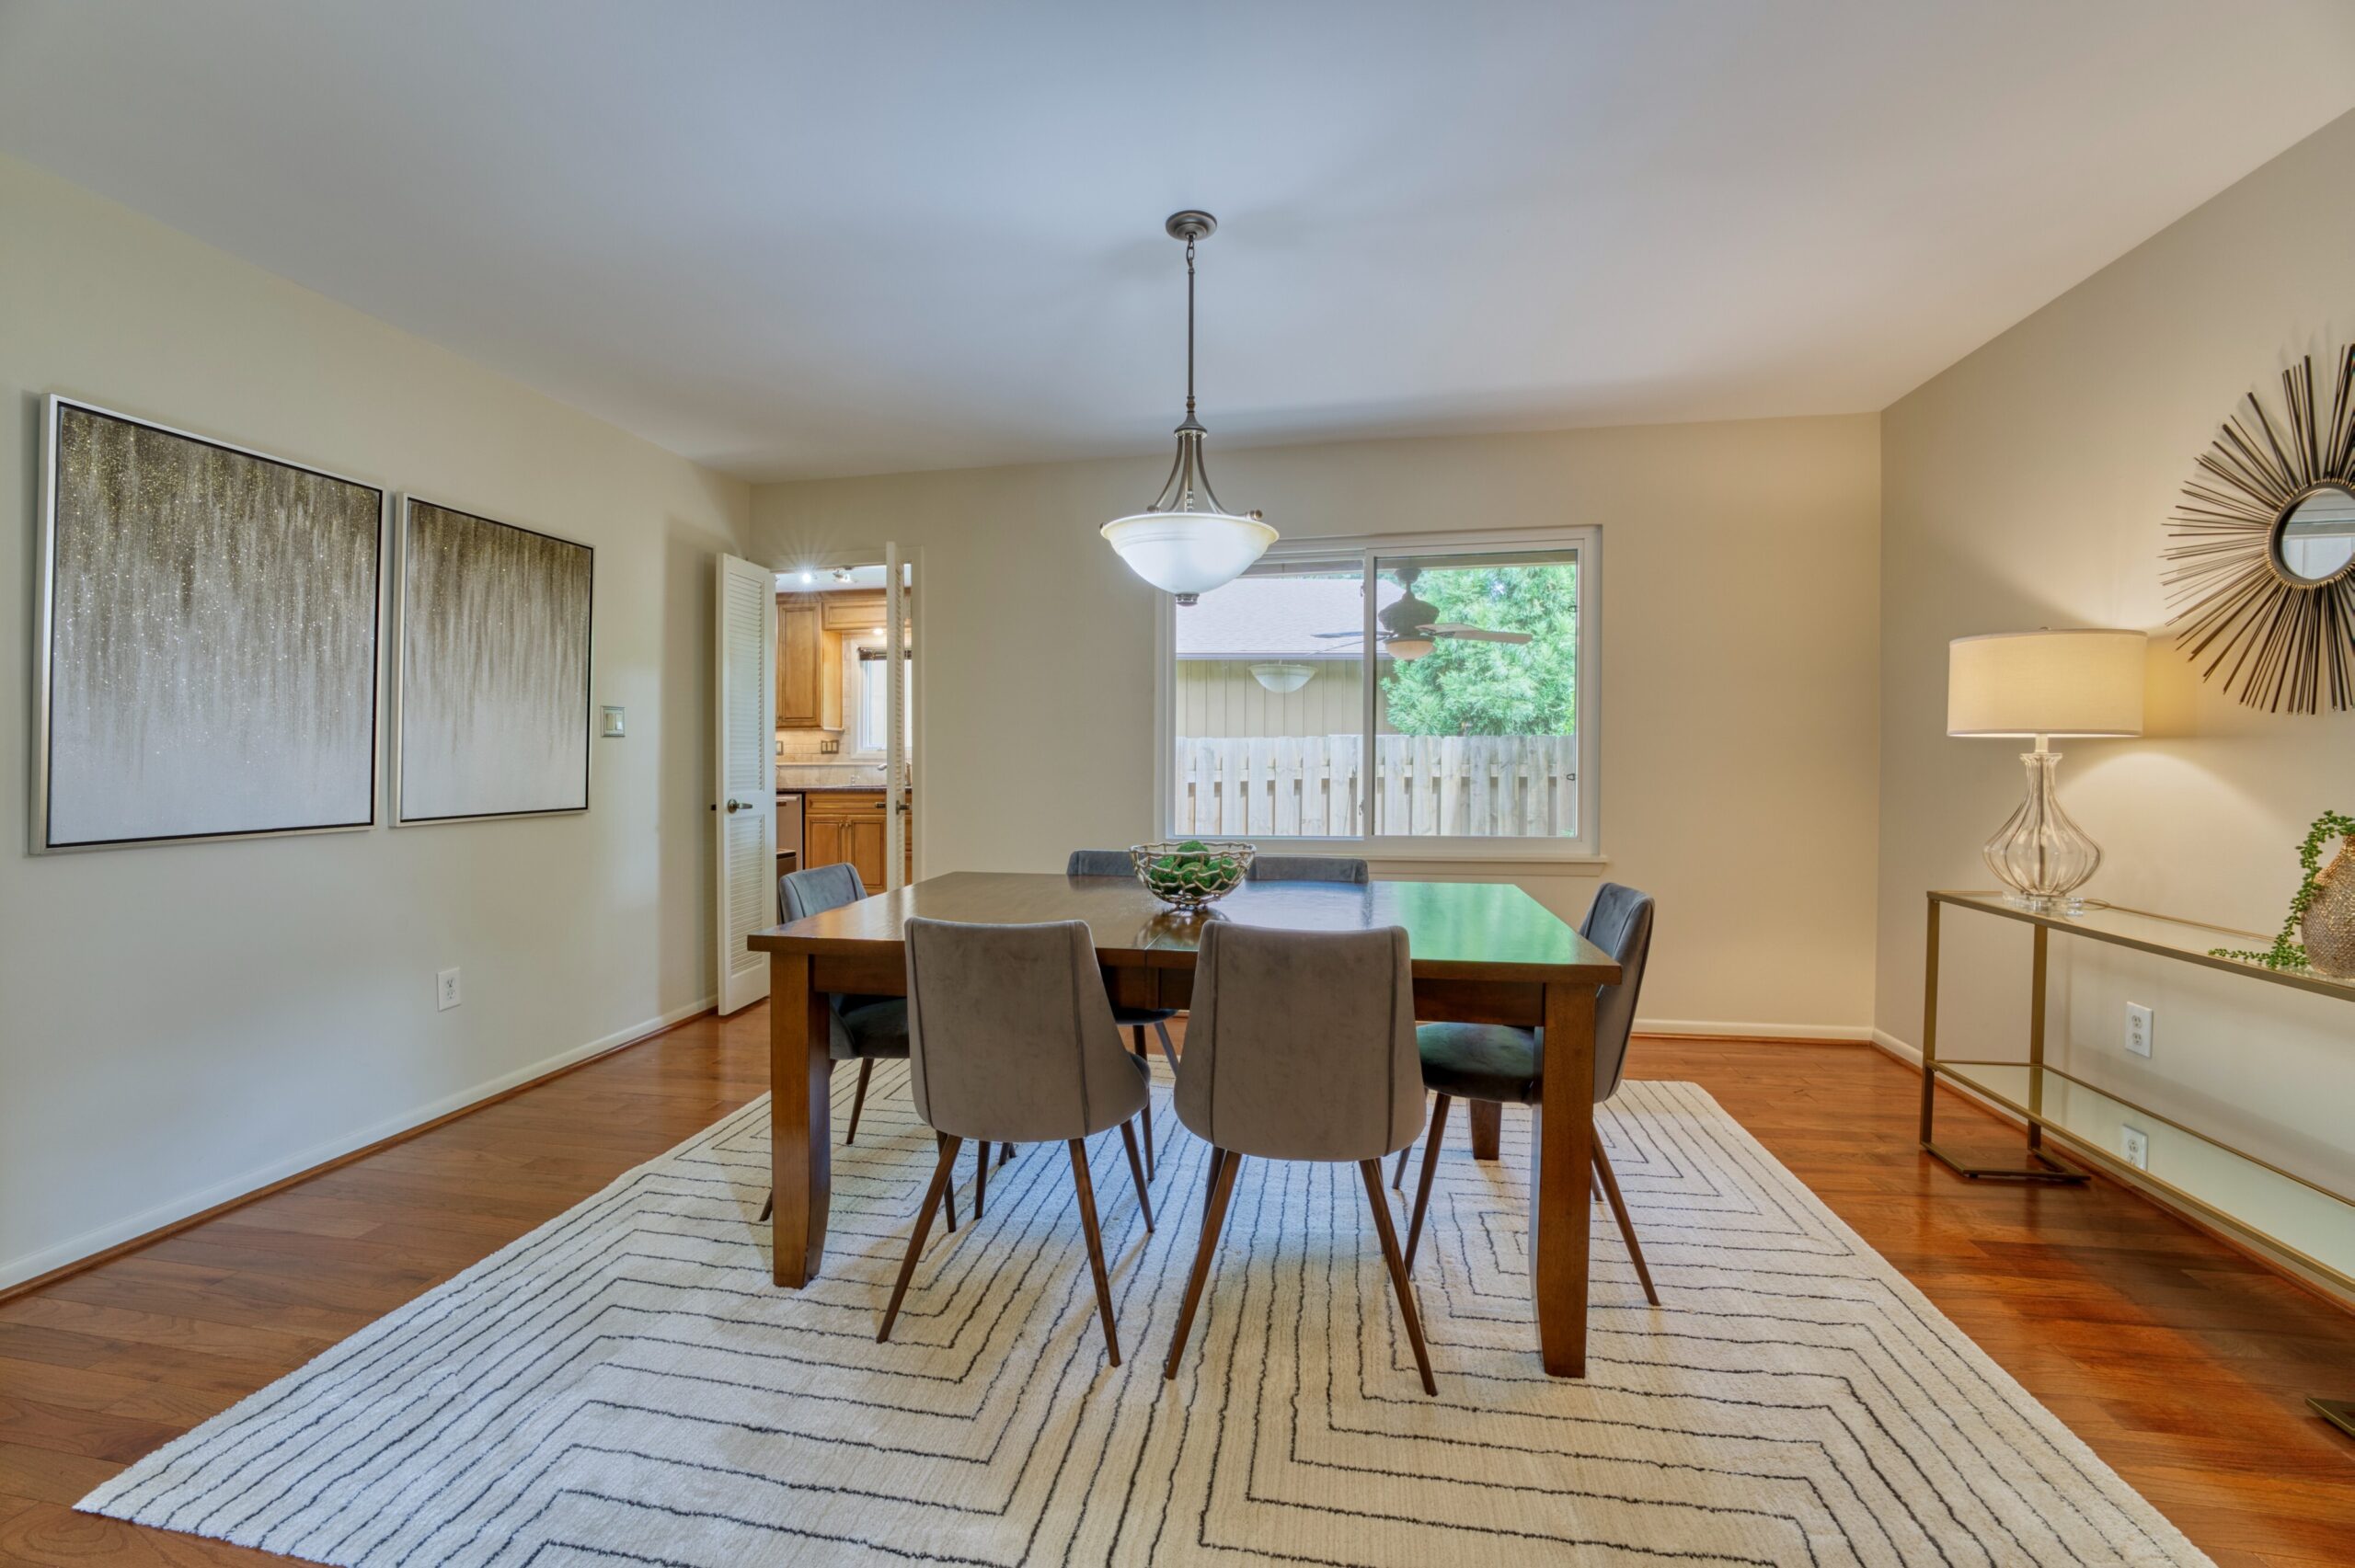 Professional interior photo of 5222 Bradfield Dr in Burke, Virginia - showing the dining room with hardwood floors